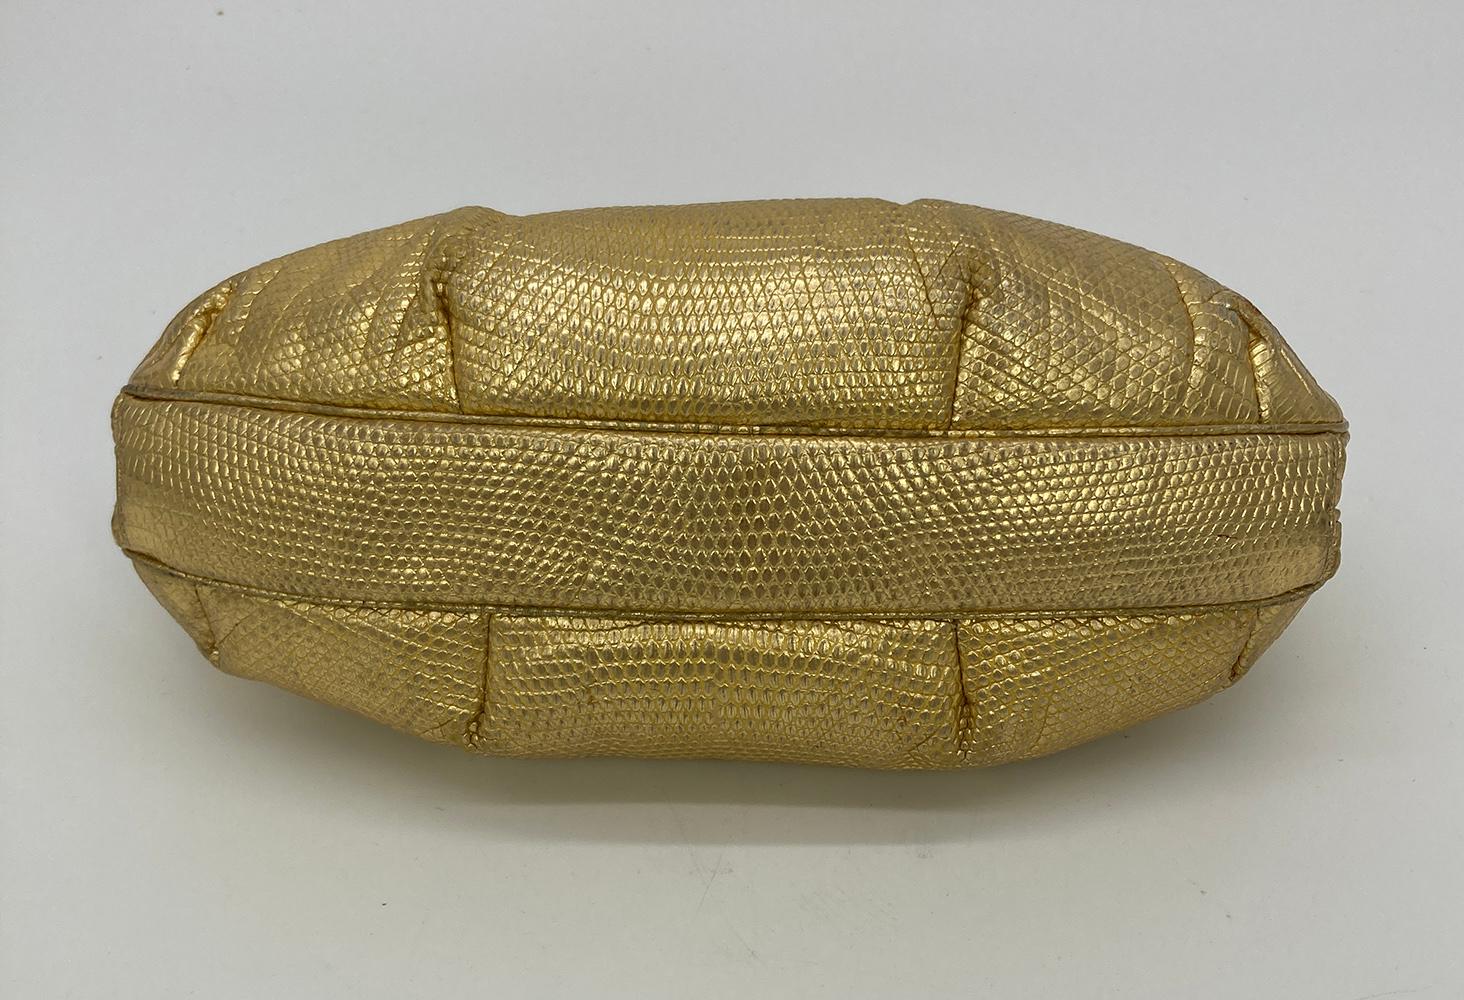 Judith Leiber Gold Lizard Gemstone Top Clutch In Good Condition For Sale In Philadelphia, PA